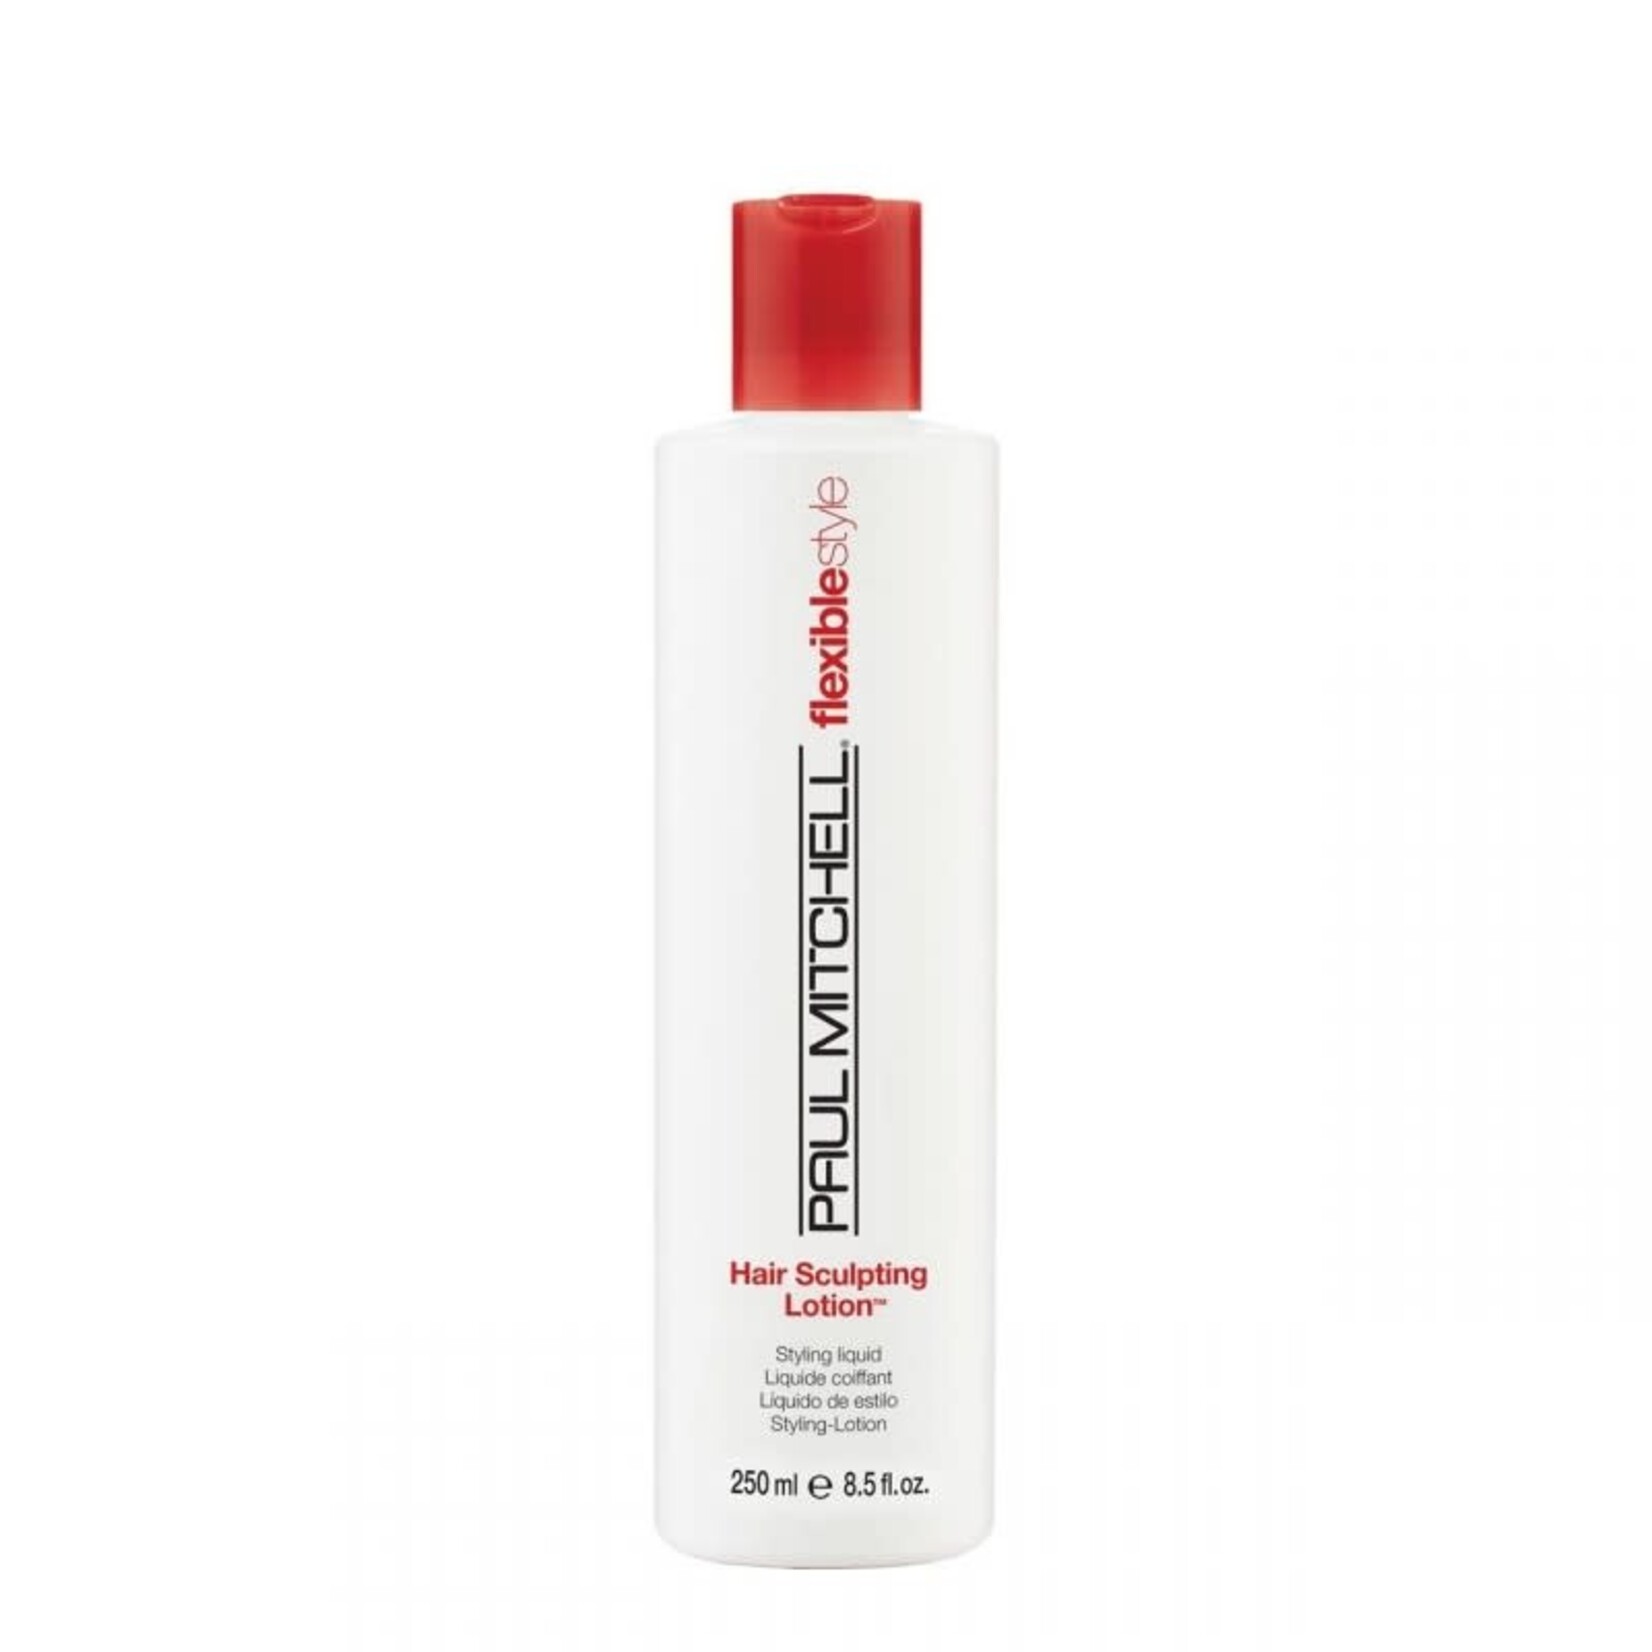 Paul Mitchell Paul Mitchell - Flexible Style - Hair Sculpting Lotion 250ml